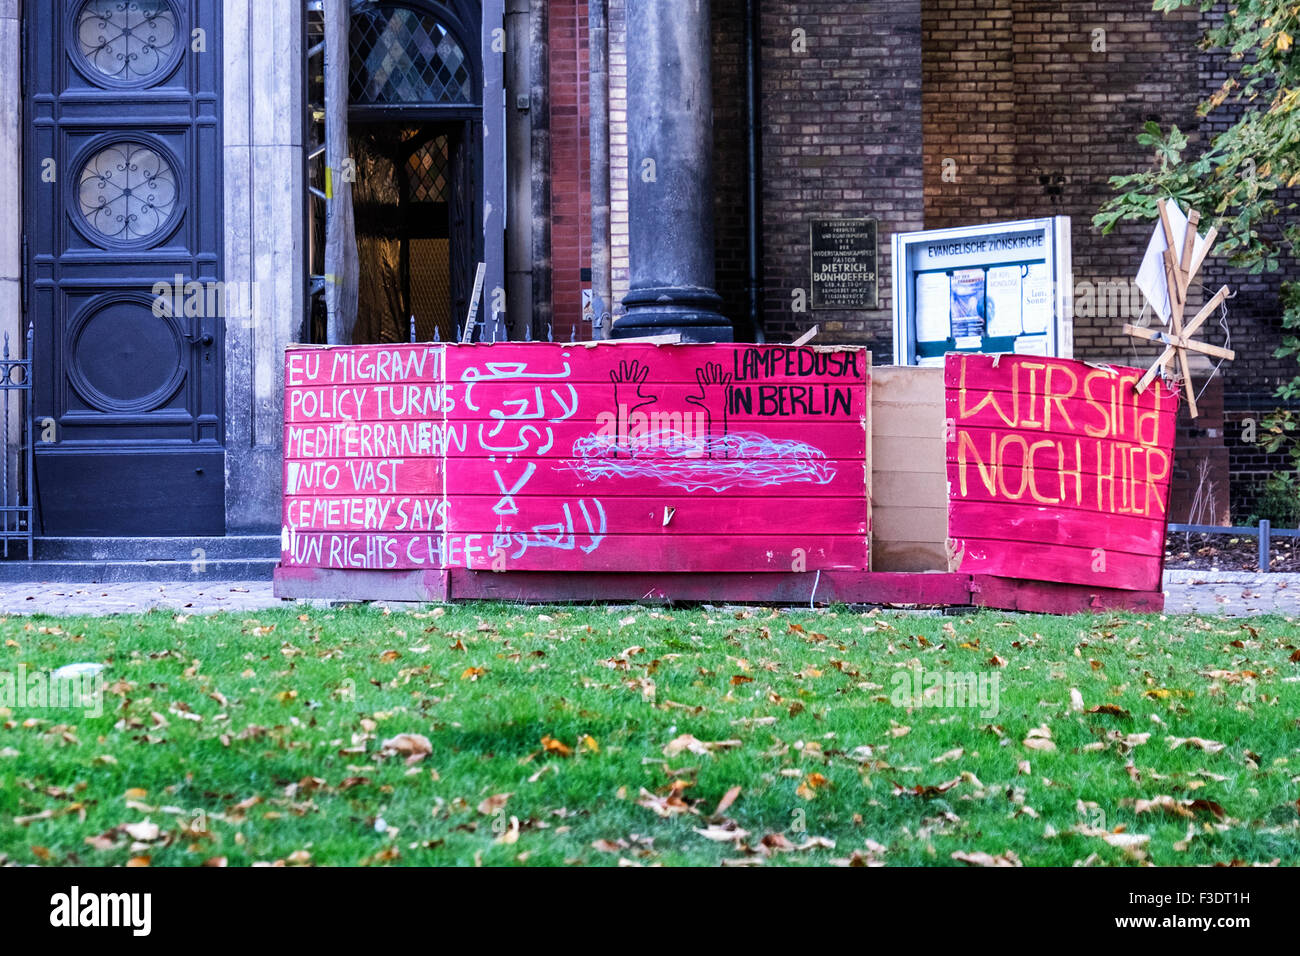 Berlin Zionskirche, Evangelical Zion church with protest art, Boat protesting death of refugees in the Mediterranean sea. Stock Photo